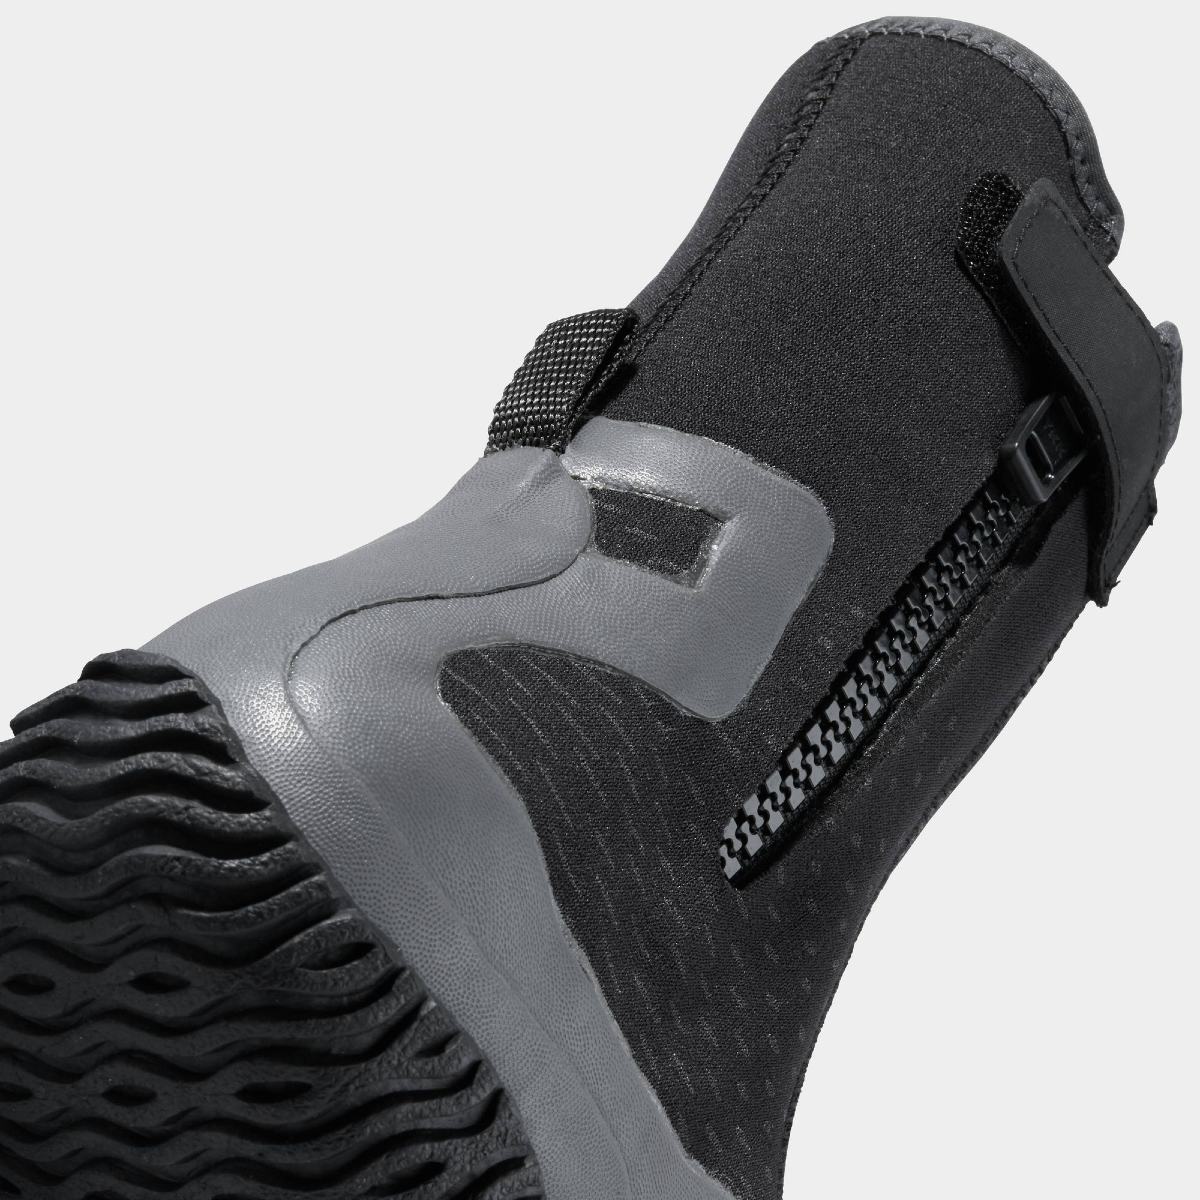 NRS Paddle Neoprene Shoes